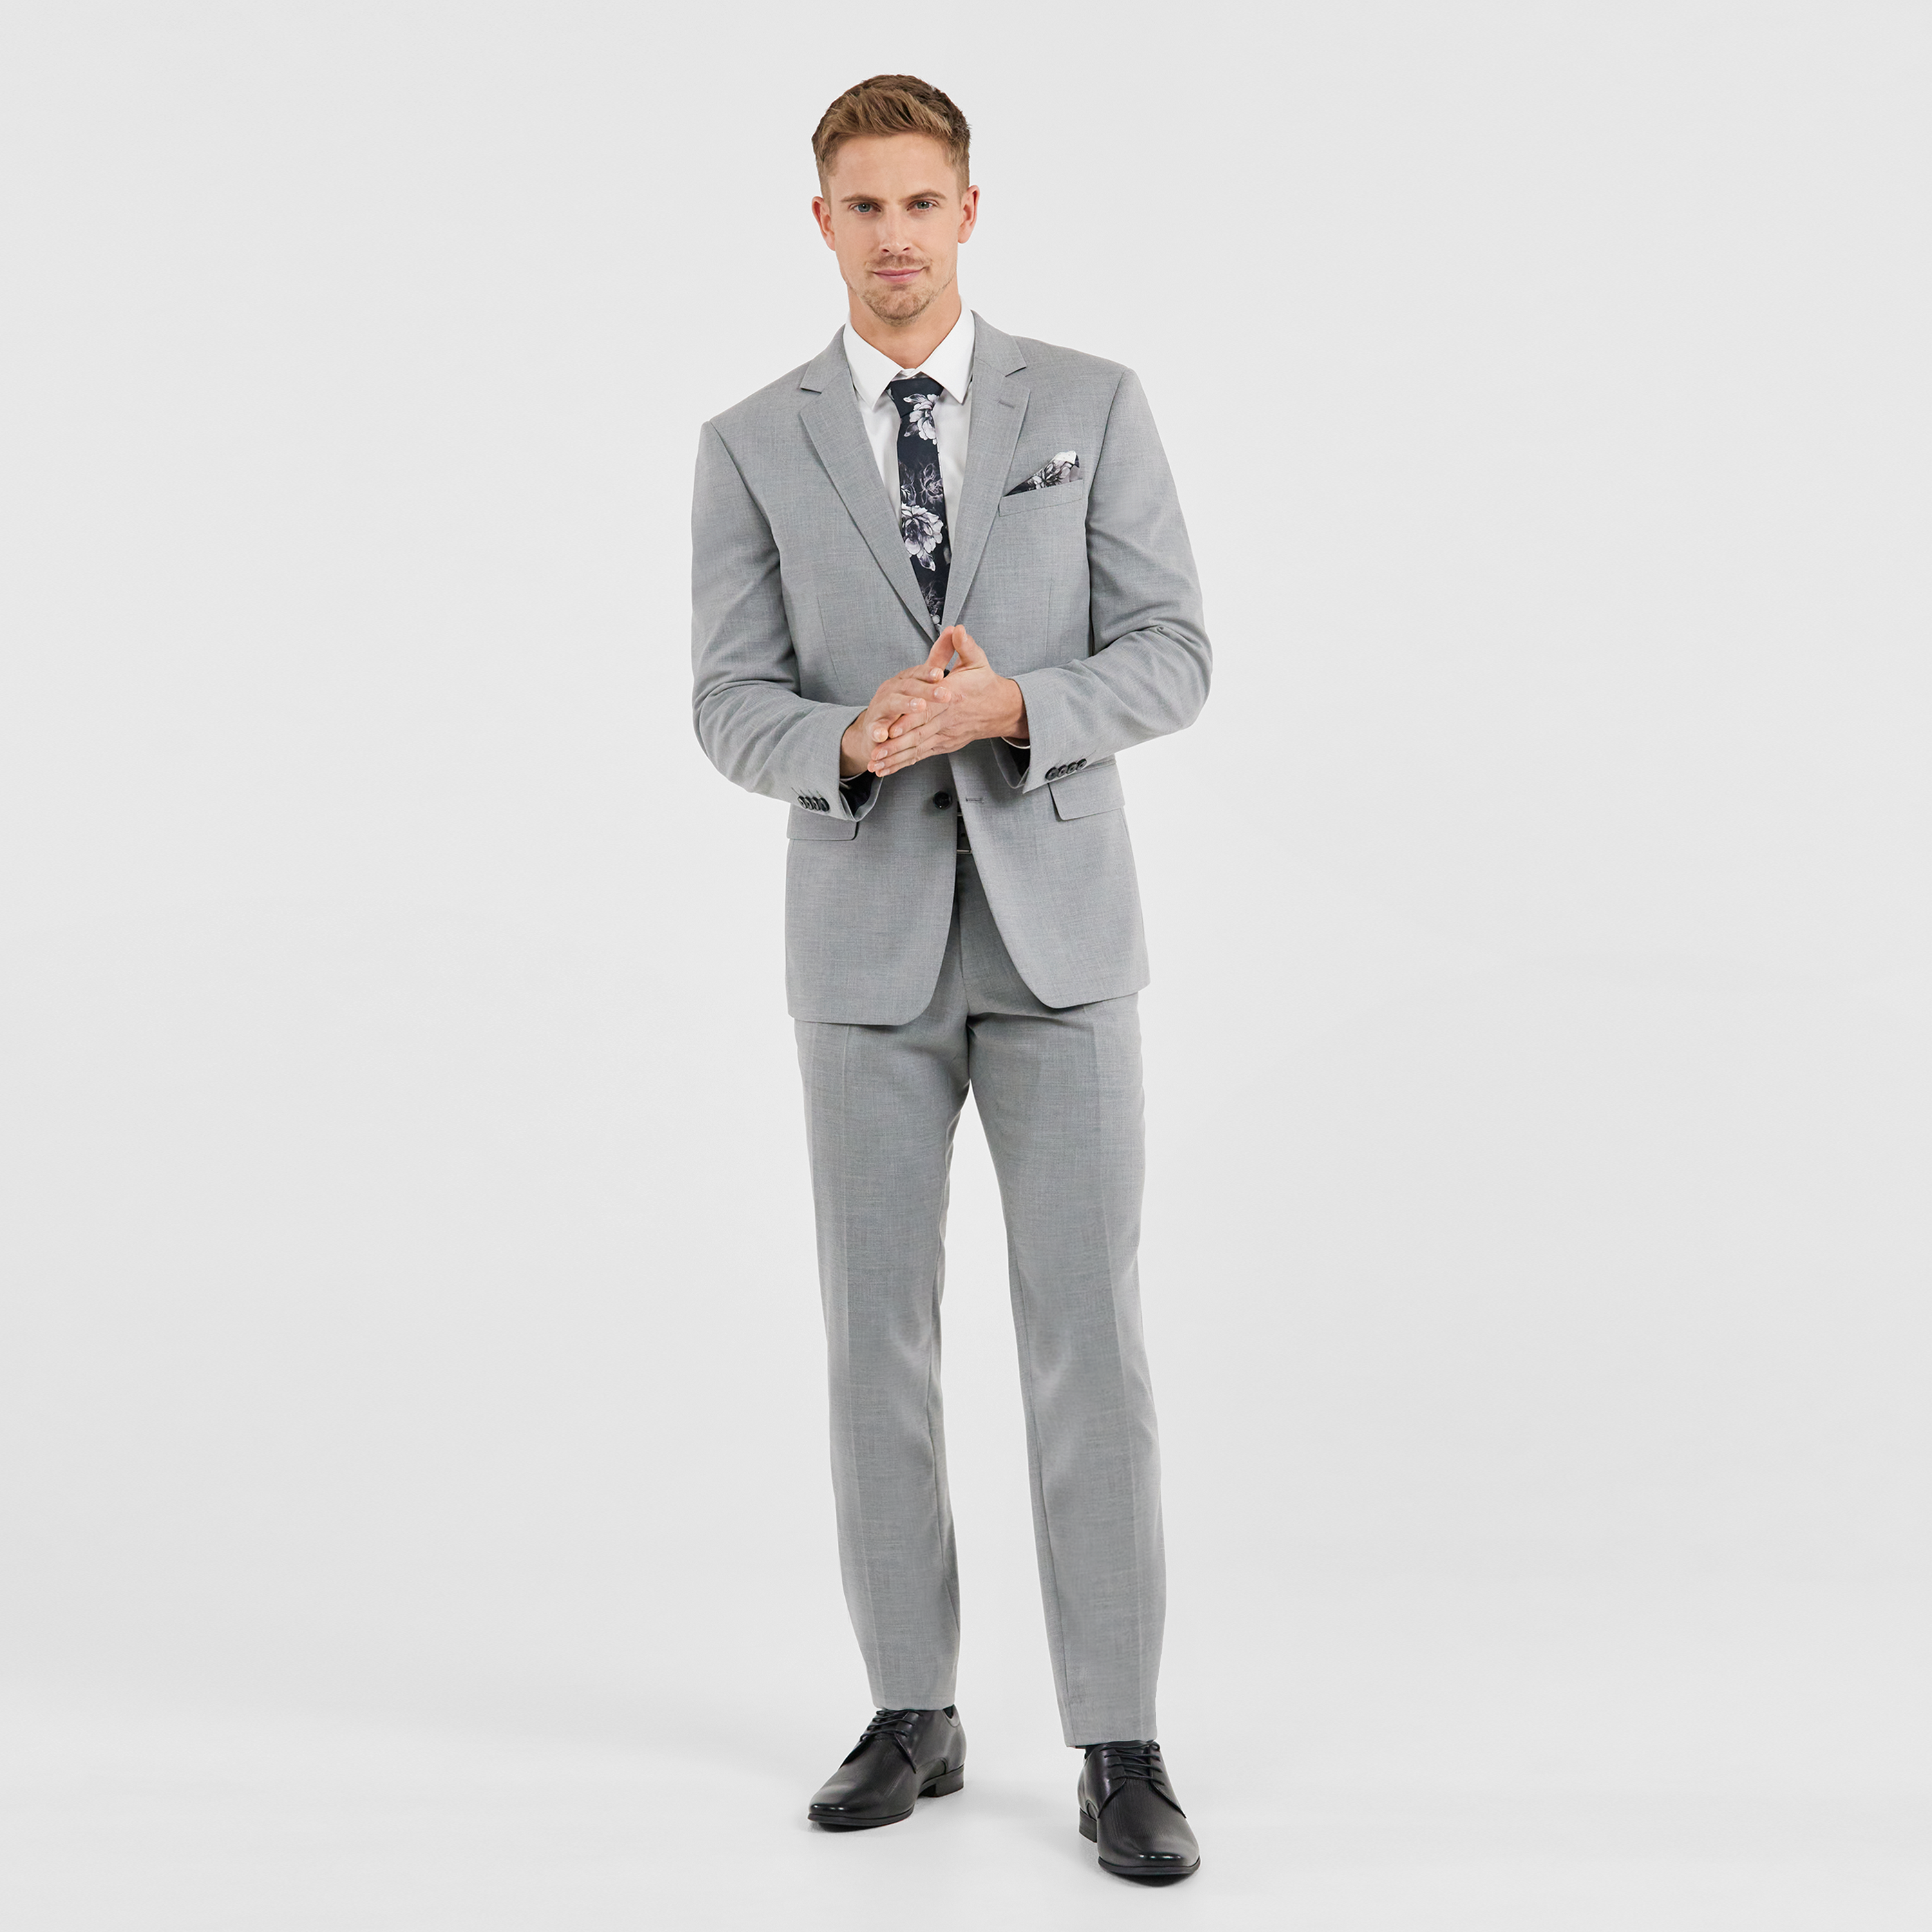 Tips for Selecting a Suit  From cut style and sizing weve got it all